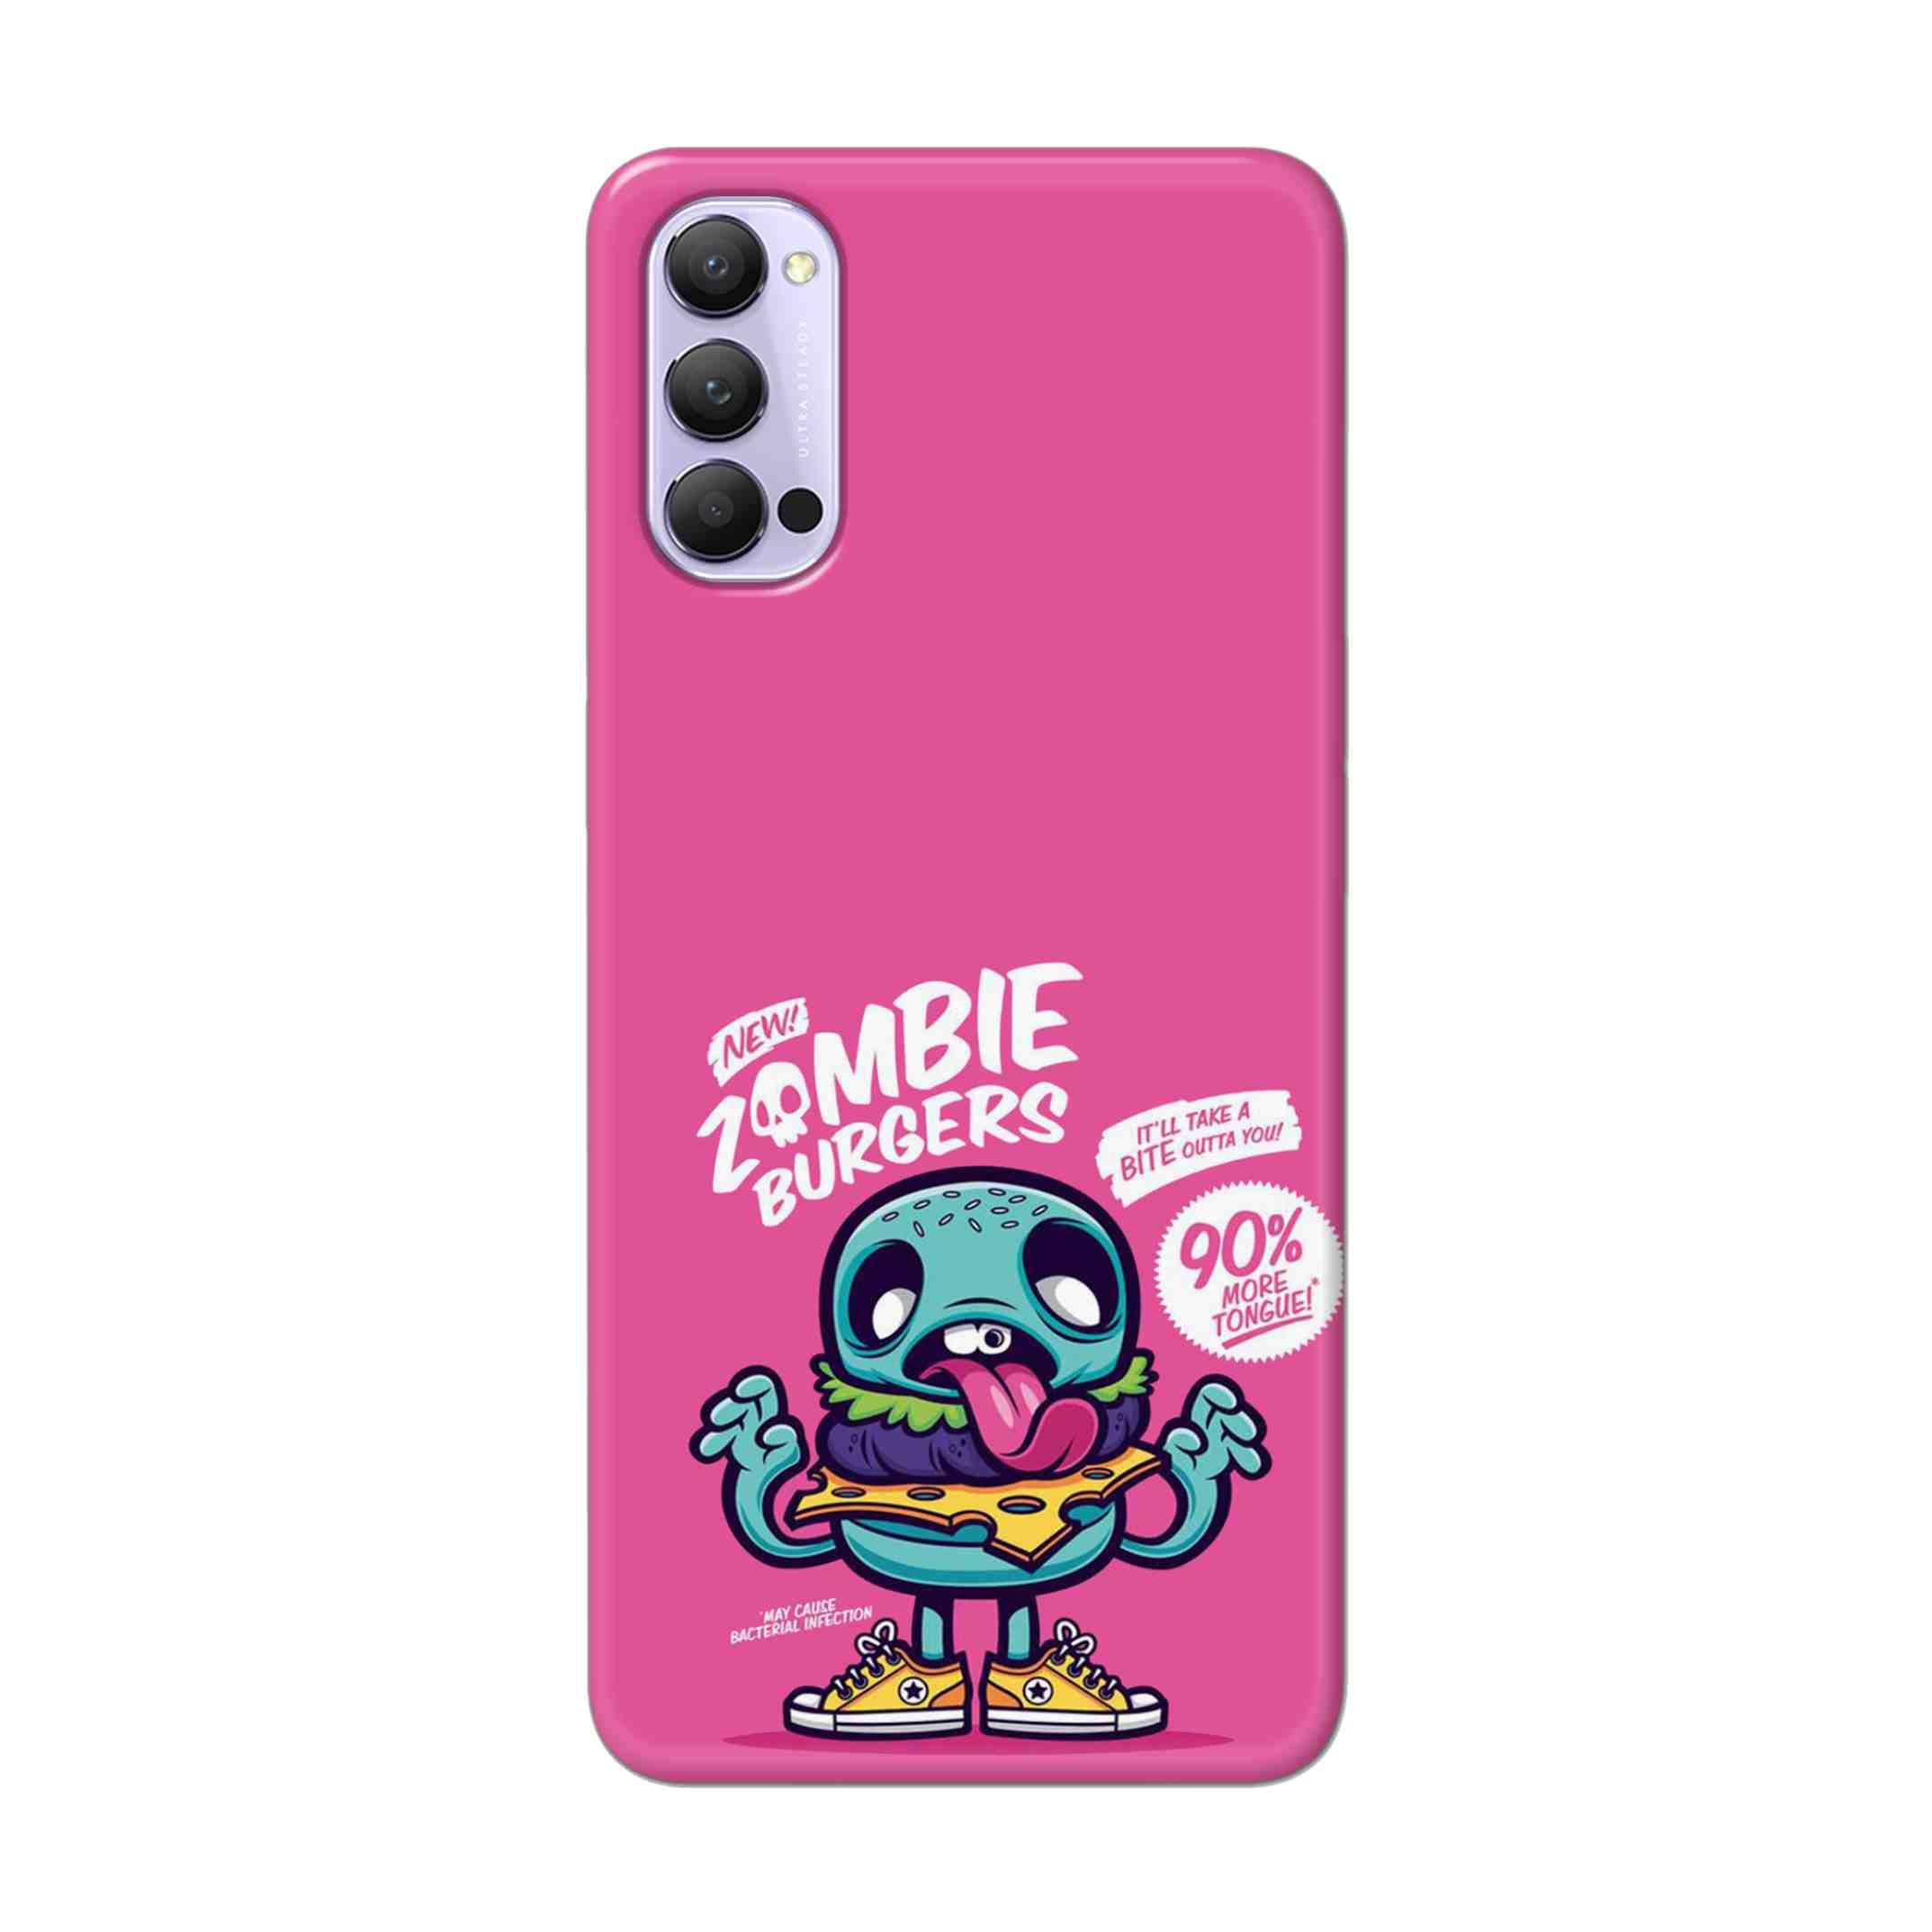 Buy New Zombie Burgers Hard Back Mobile Phone Case Cover For Oppo Reno 4 Pro Online